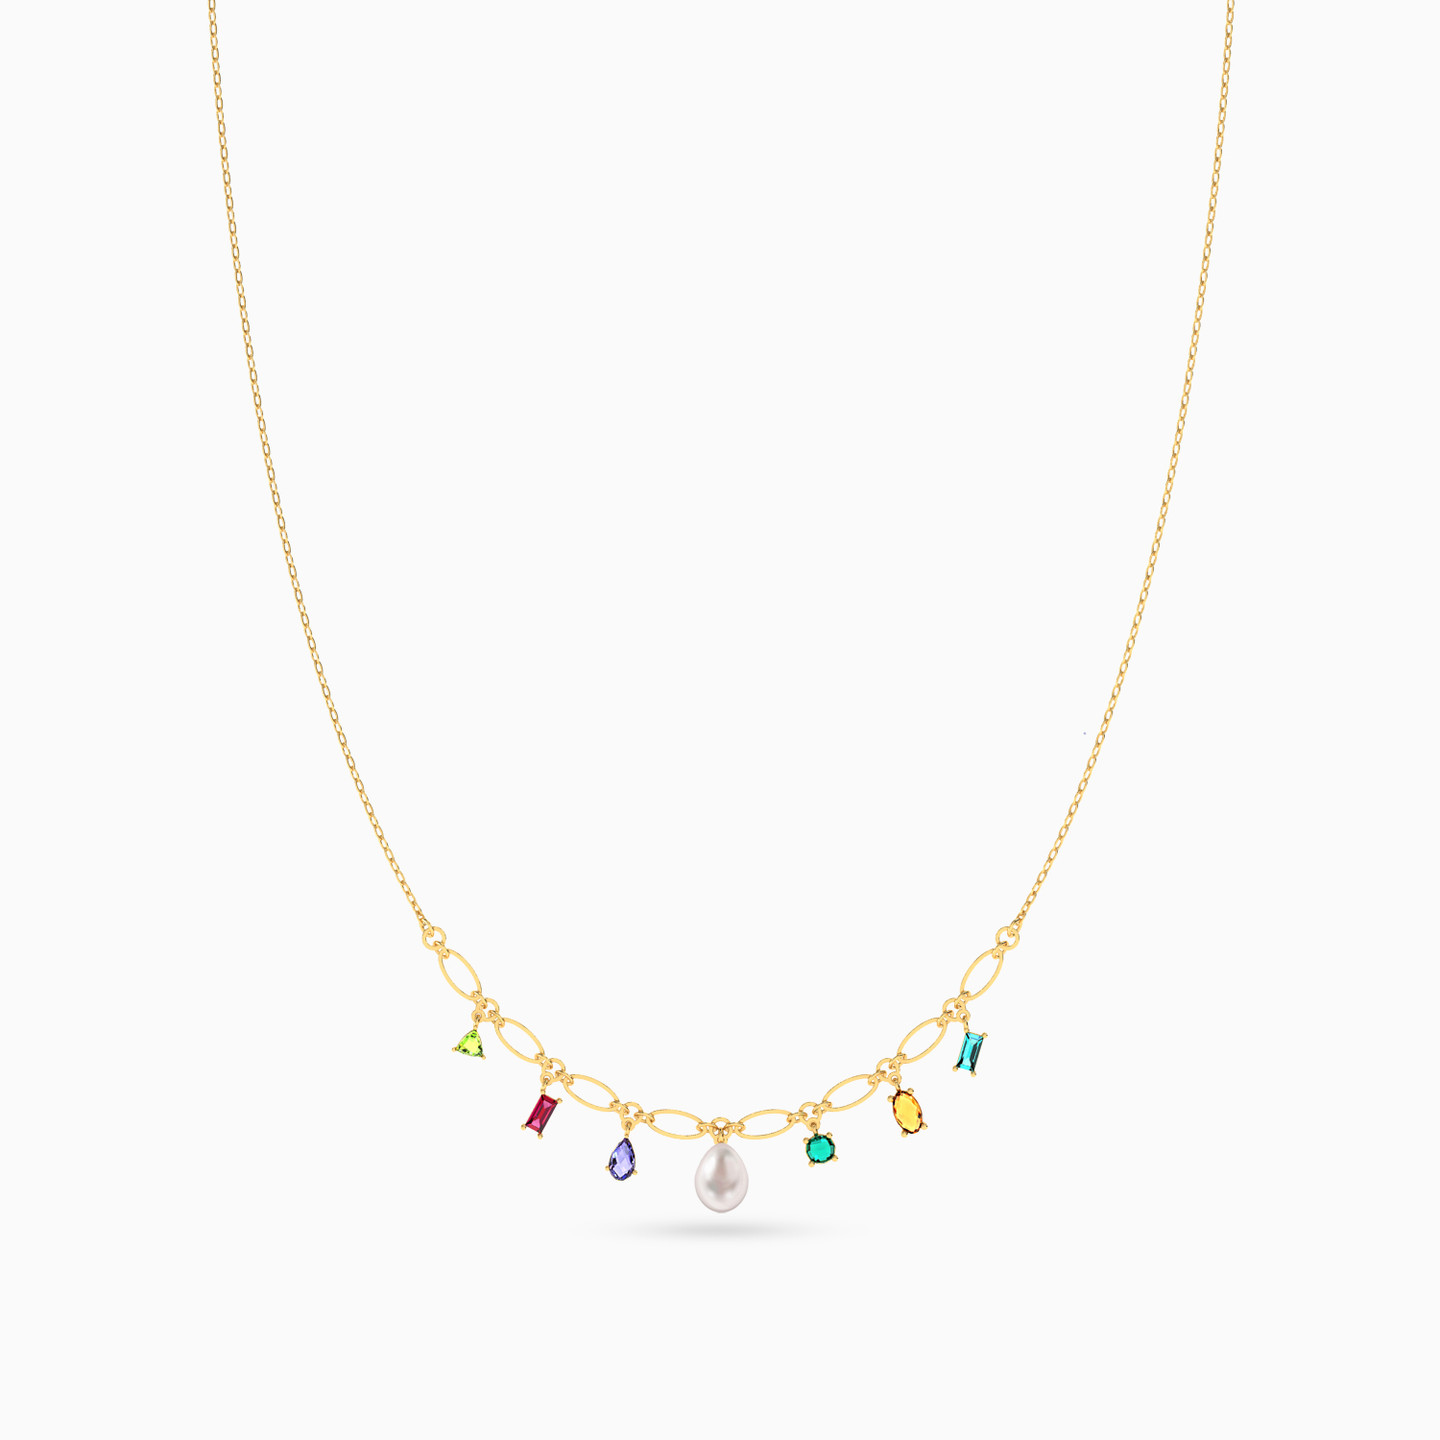 18K Gold Pearls & Colored Stones Charms Necklace - 3